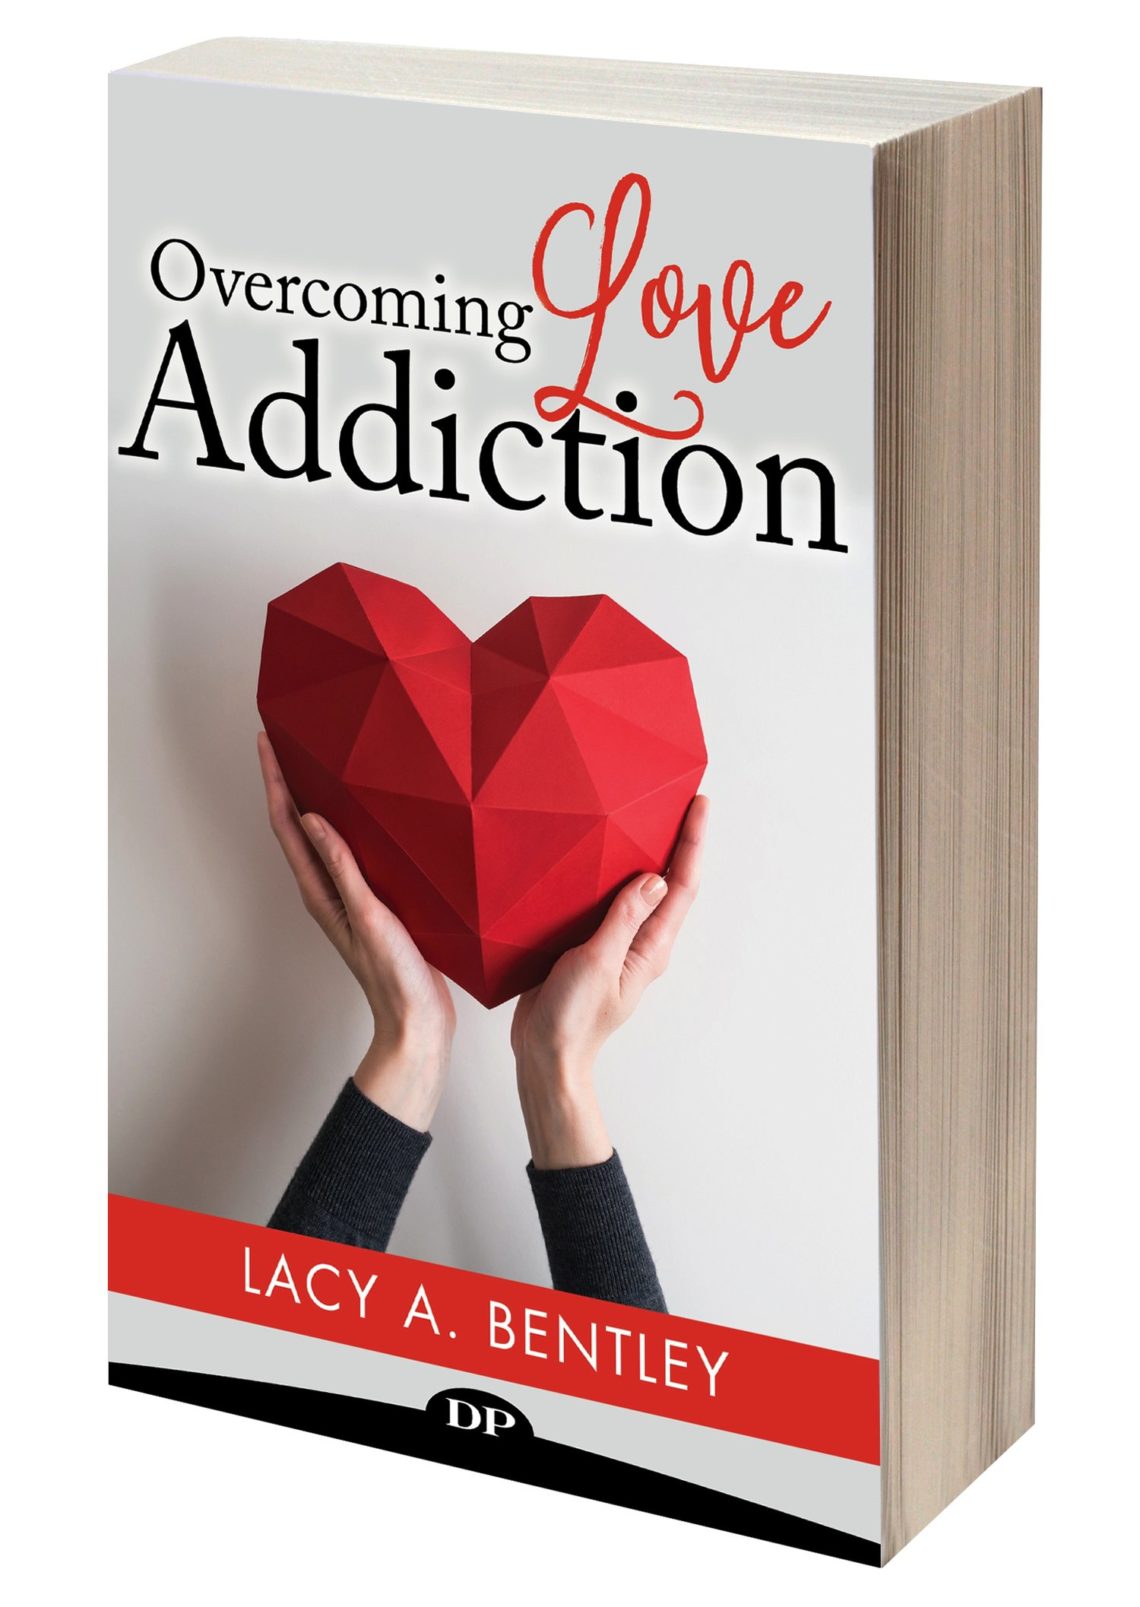 Overcoming Love Addiction by Lacy Alajna Bentley